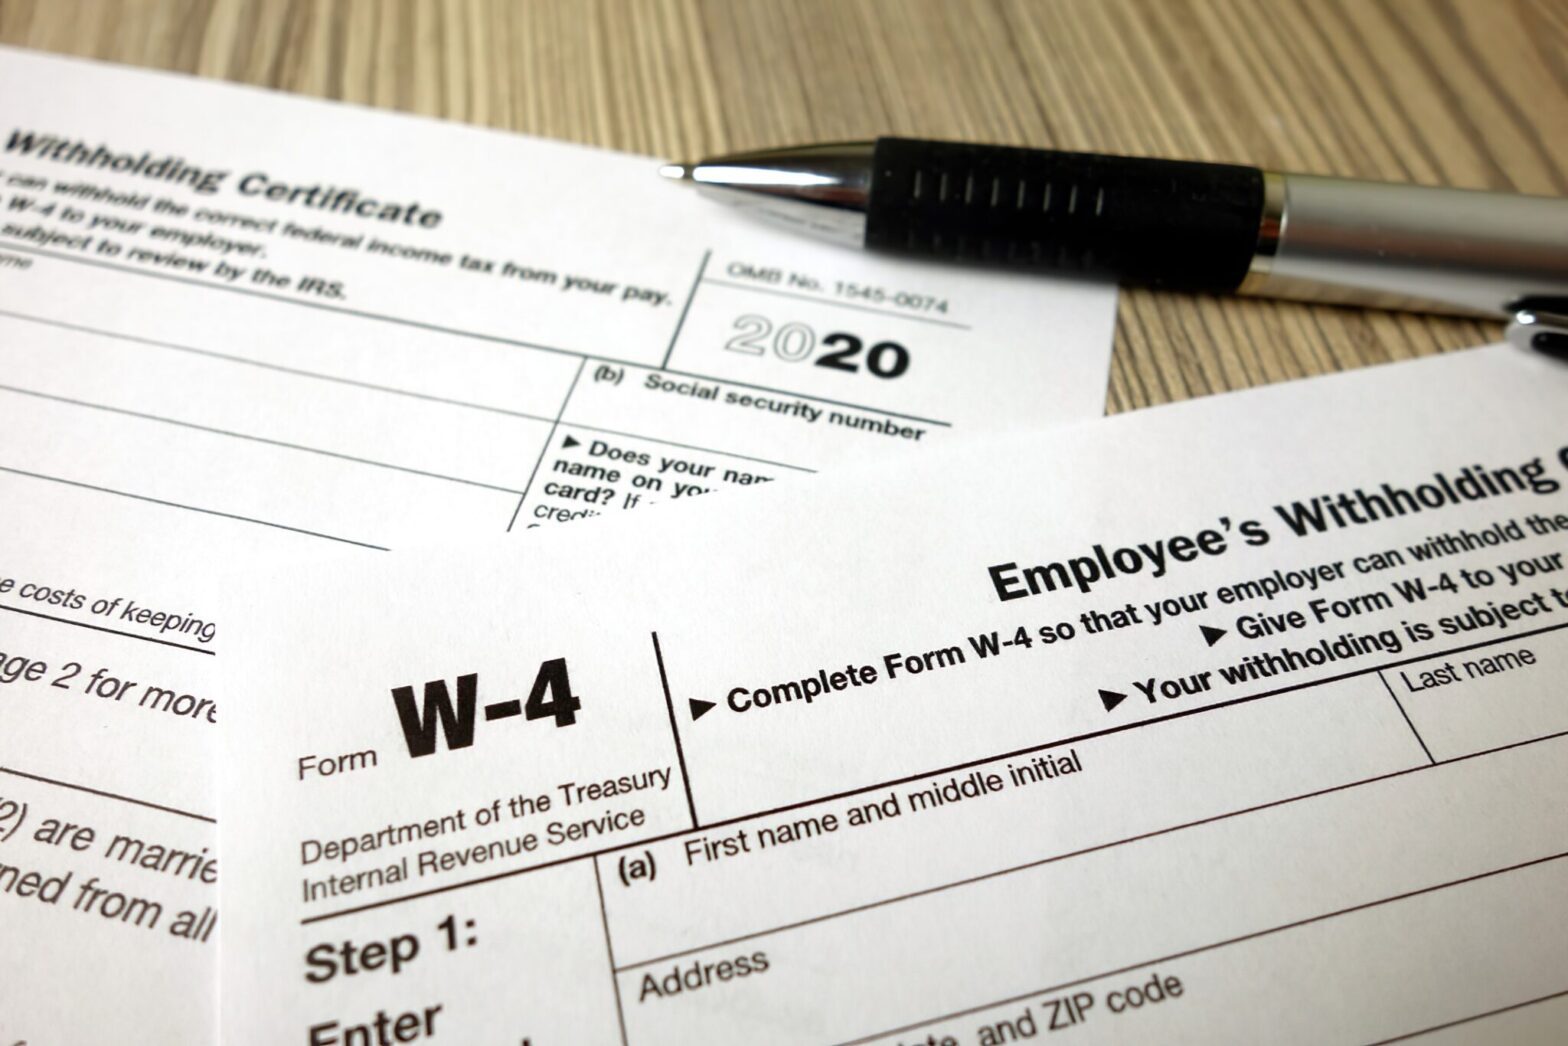 Employee's Withholding